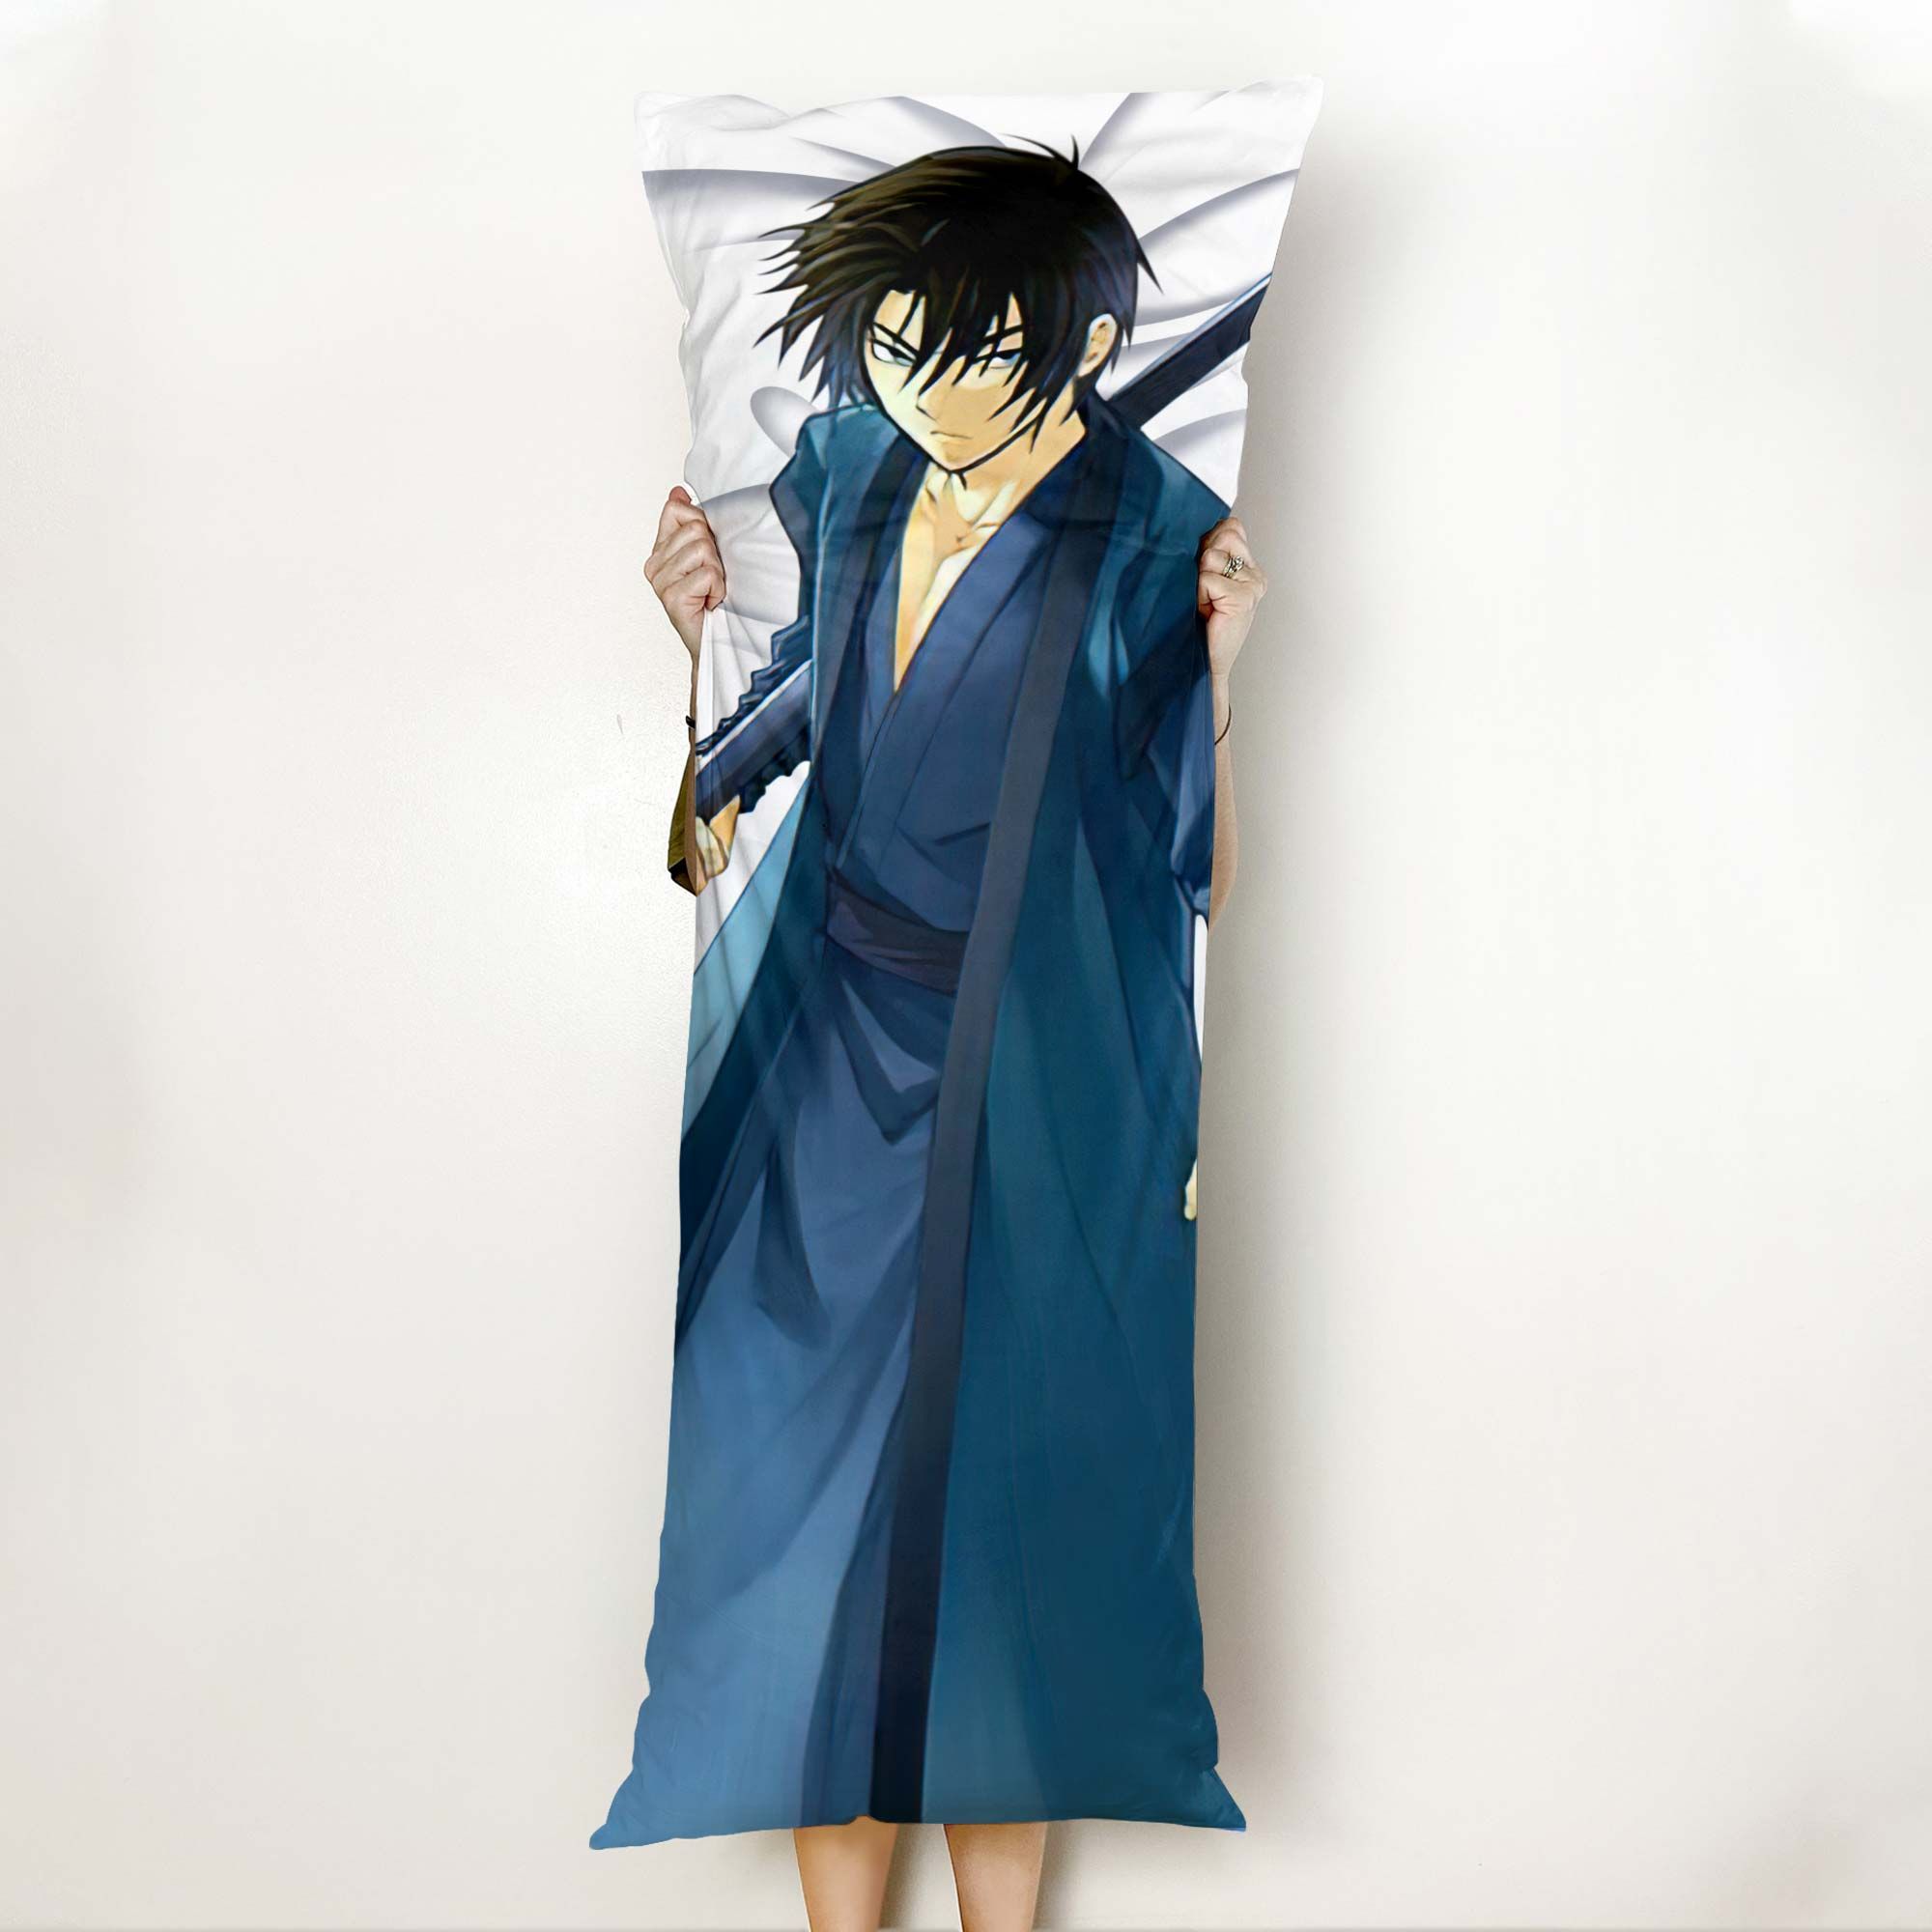 Hak Body Pillow Cover Custom Yona of the Dawn Anime Gifts Official Merch GO0110